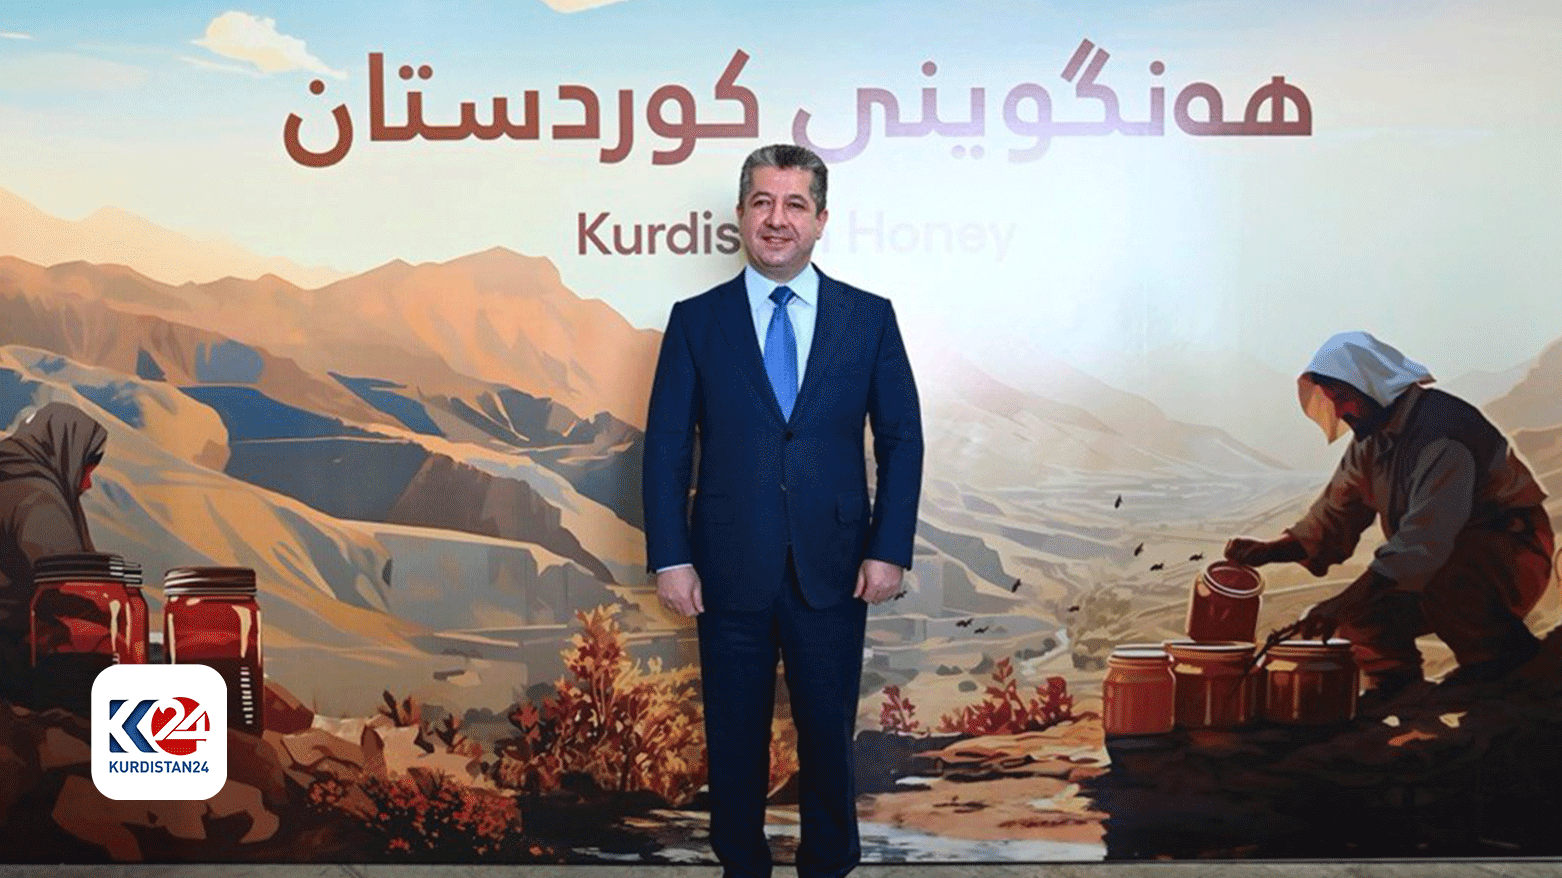 Prime Minister Masrour Barzani poses for a photo at a meeting of the Beekeepers Network Association of Kurdistan. (Photo: KRG)